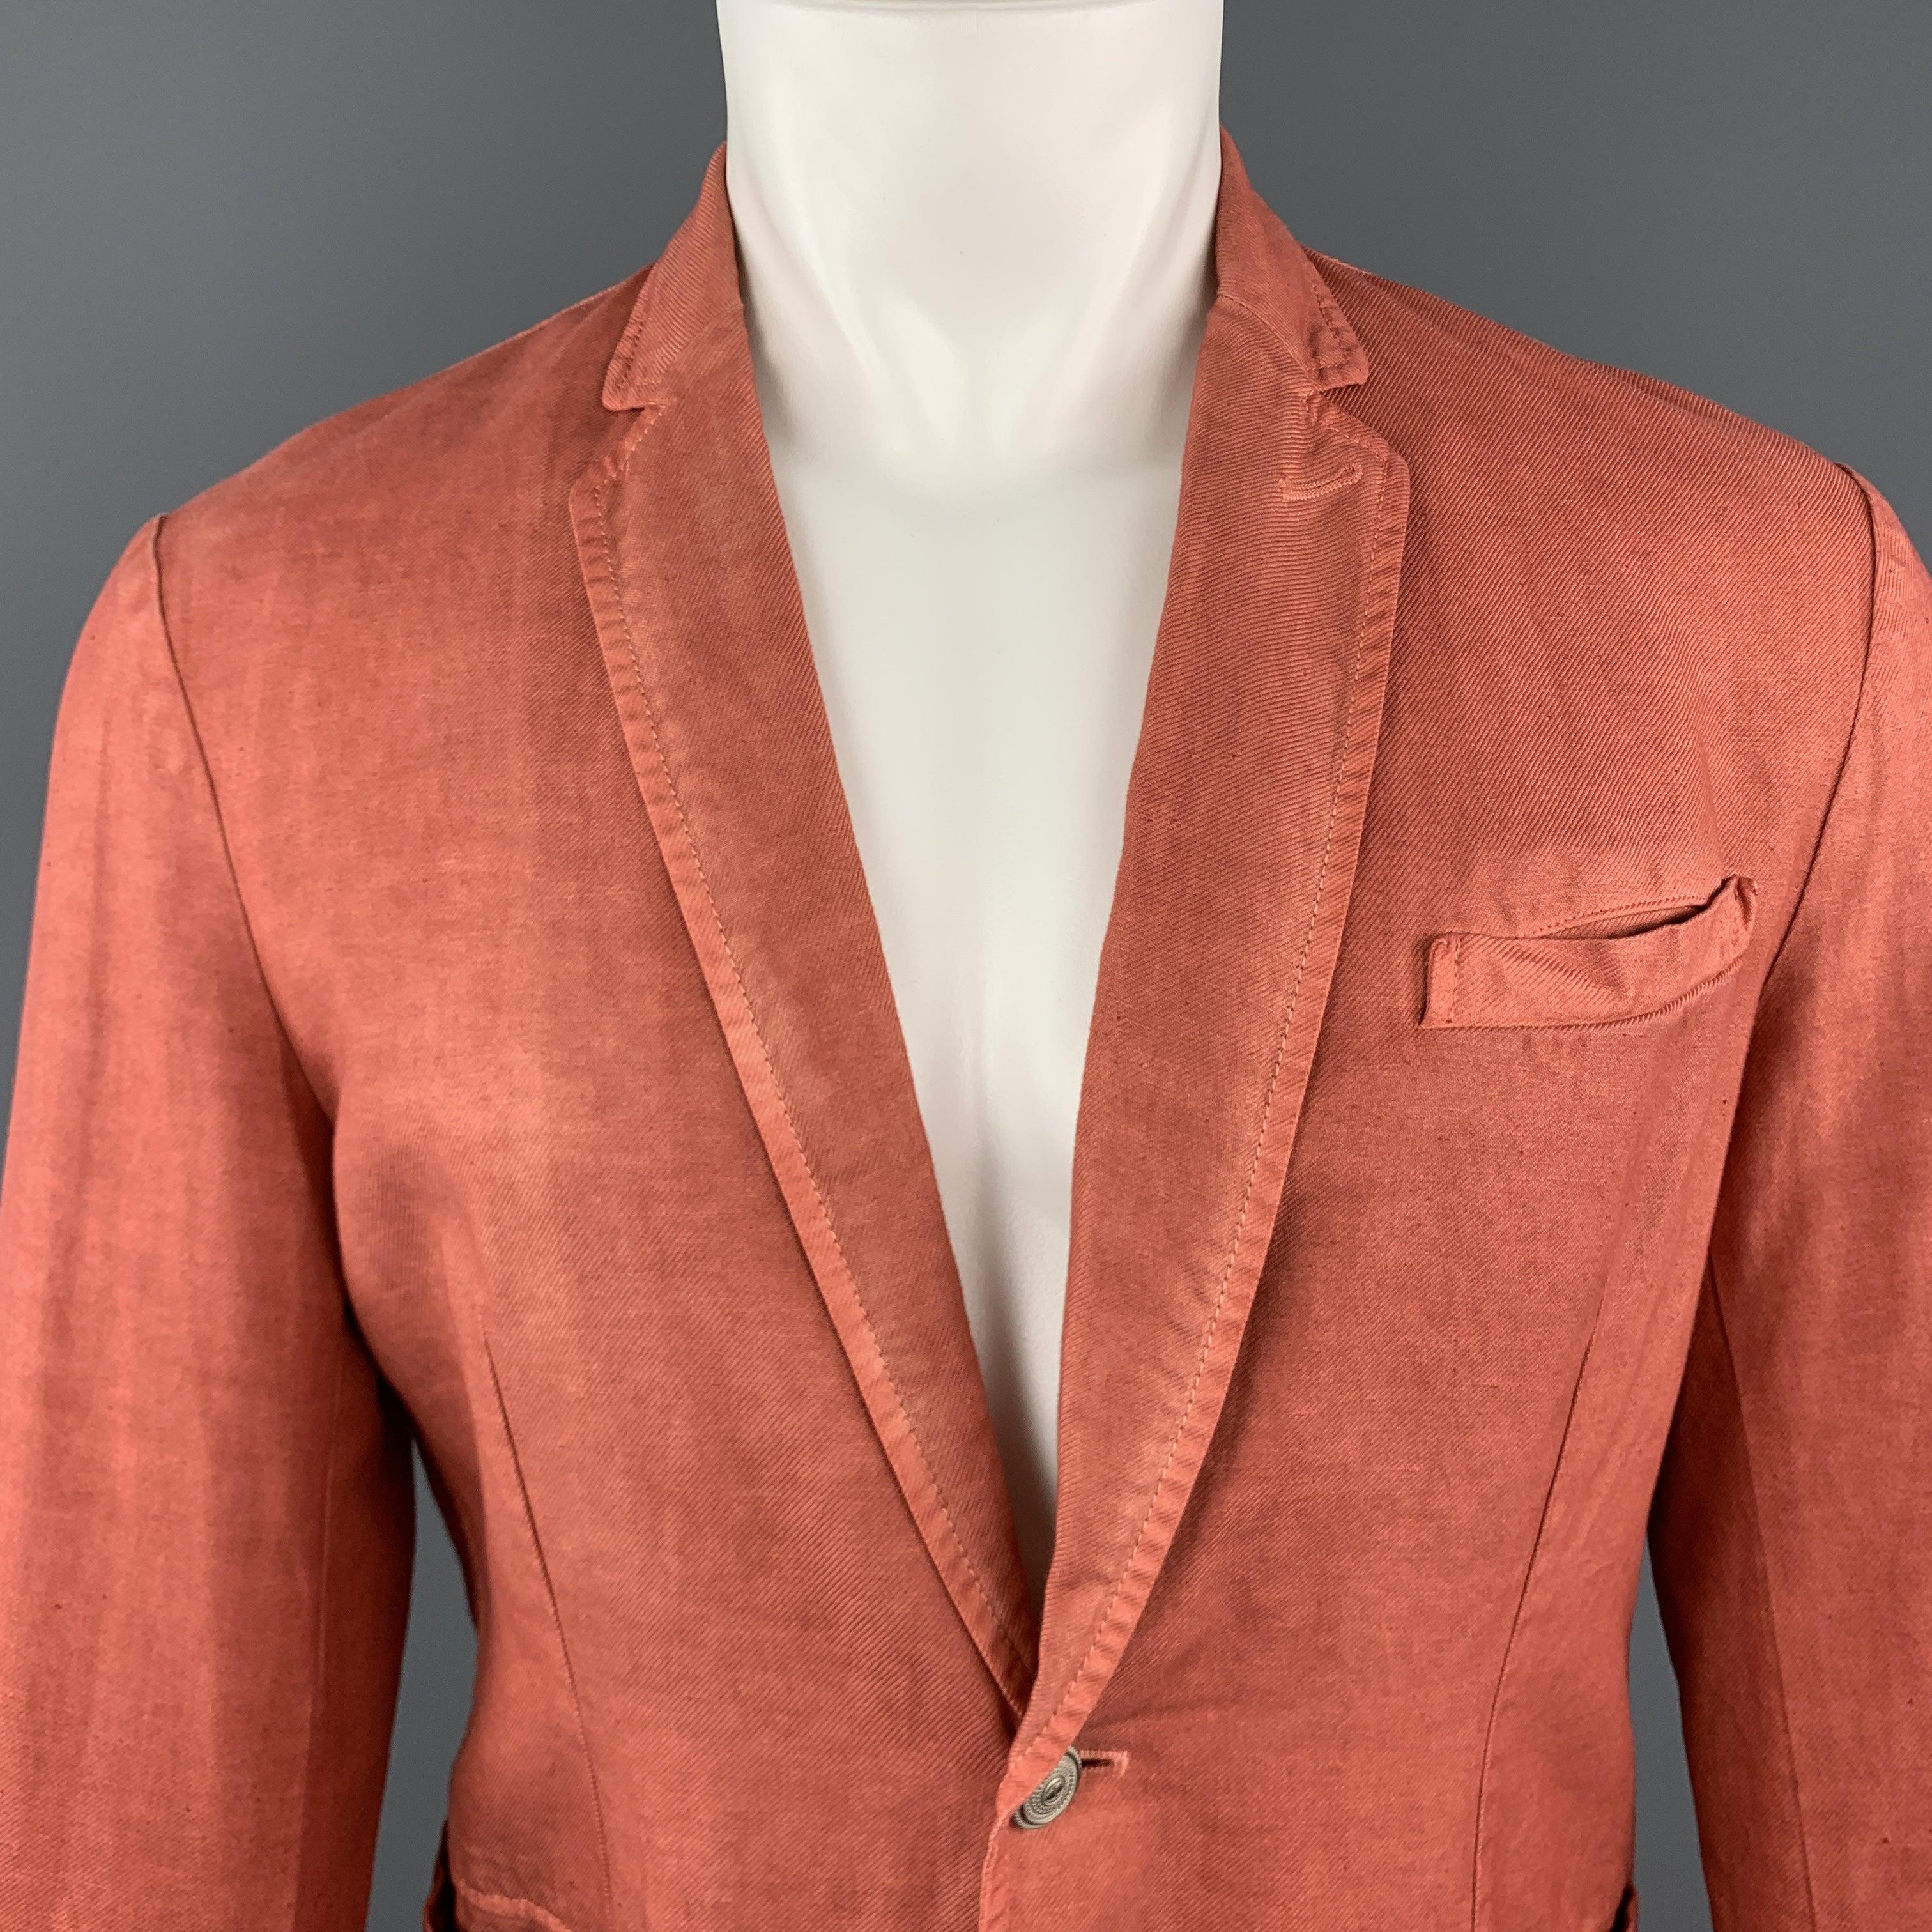 JUST CAVALLI by ROBERTO CAVALLI
sport coat comes in washed brick red cotton linen blend textured twill with a notch lapel, single breasted, two button front, and silver tone metal buttons. Made in Italy.Excellent Pre-Owned Condition. 

Marked:   IT